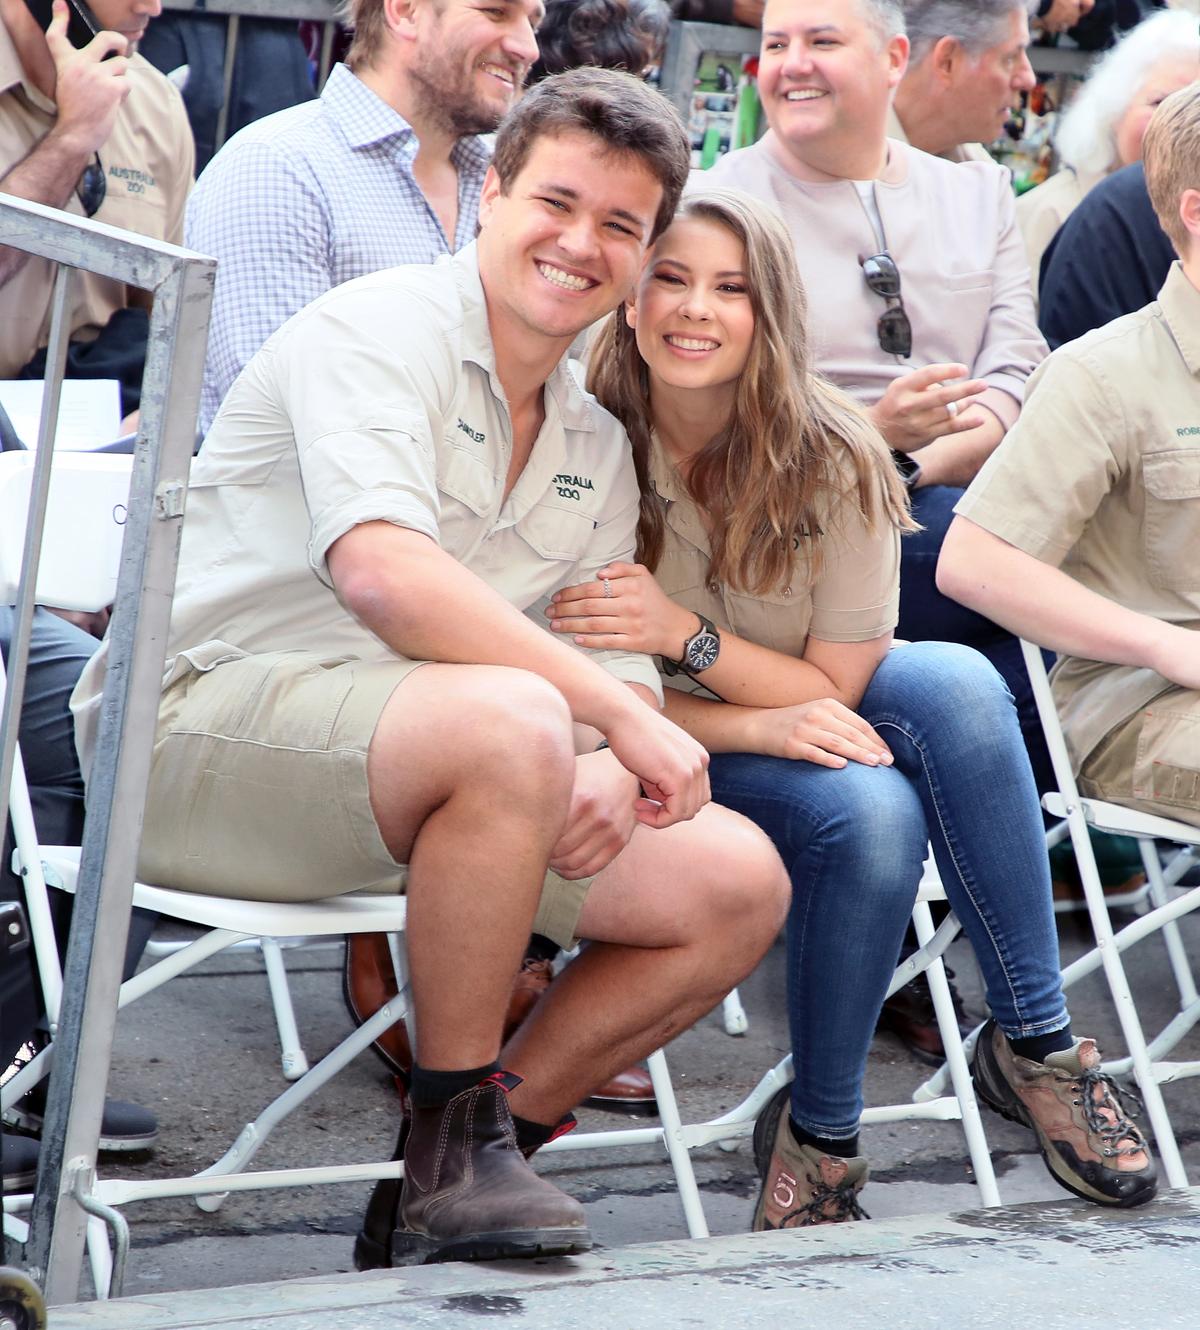 Wakeboarder Chandler Powell (L) and conservationist/TV personality Bindi Irwin attend Steve Irwin being honored posthumously with a Star on the Hollywood Walk of Fame on April 26, 2018, in Hollywood, Calif. (David Livingston/Getty Images)